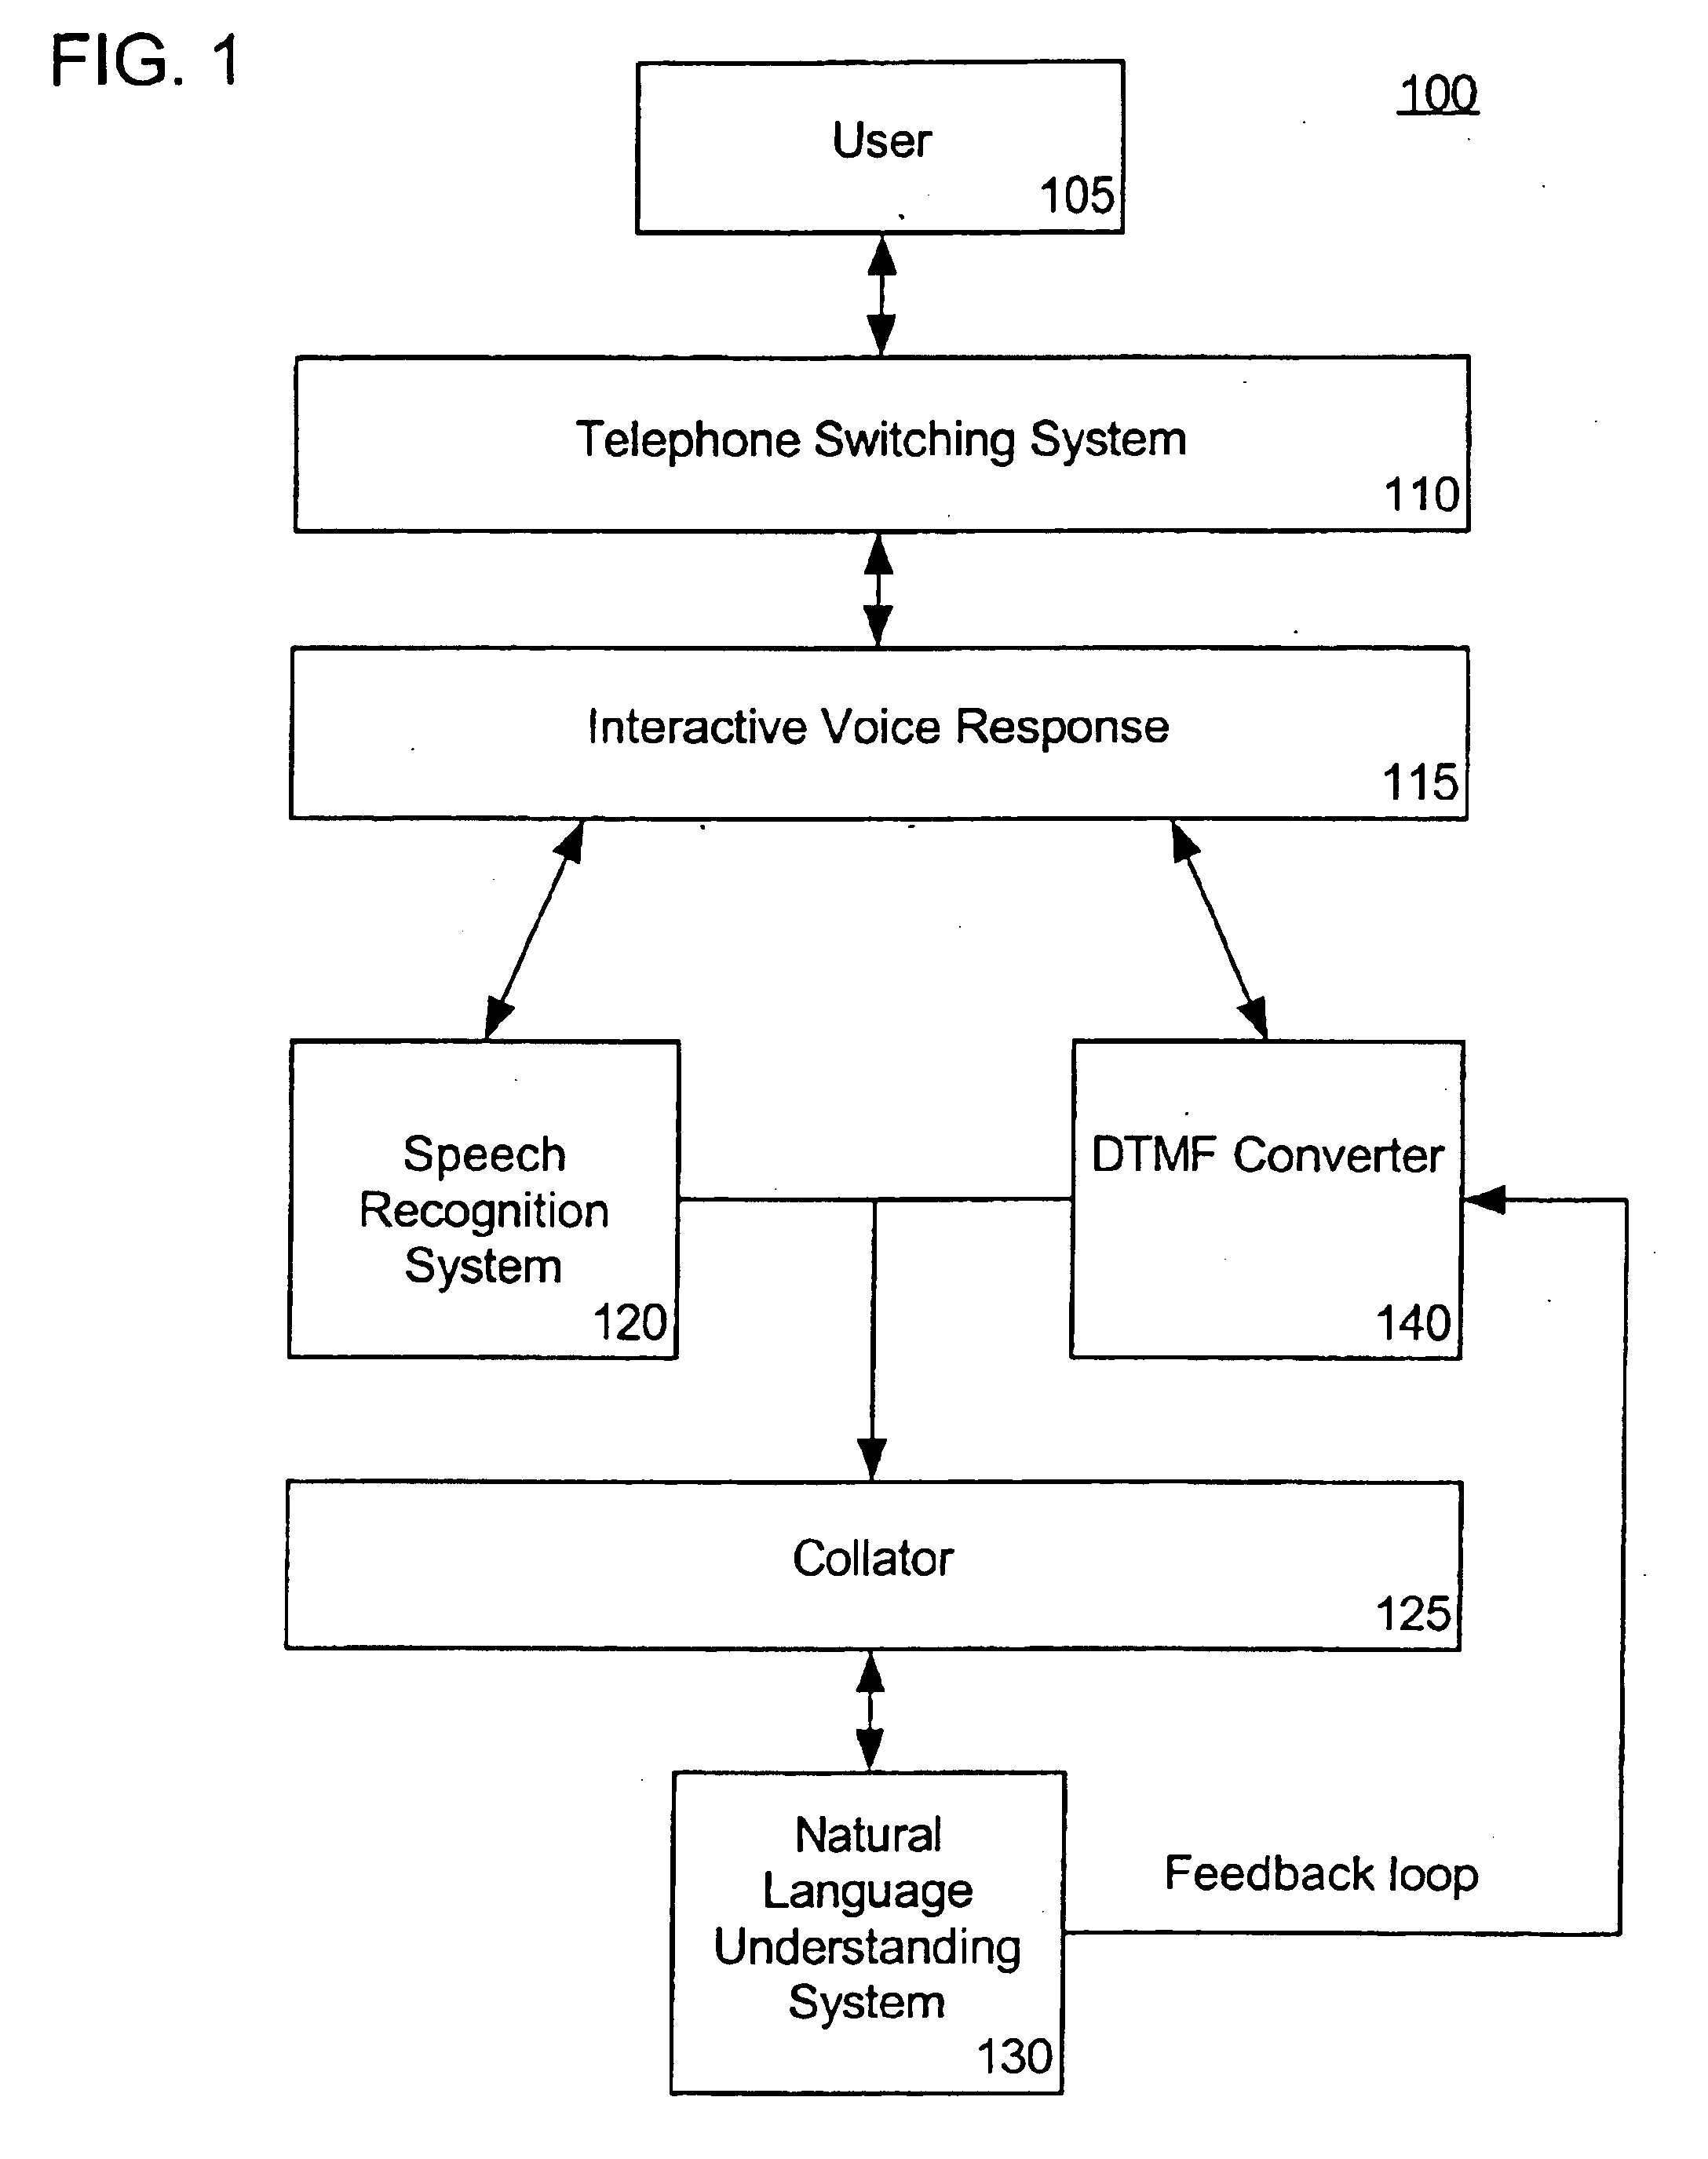 Processing dual tone multi-frequency signals for use with a natural language understanding system